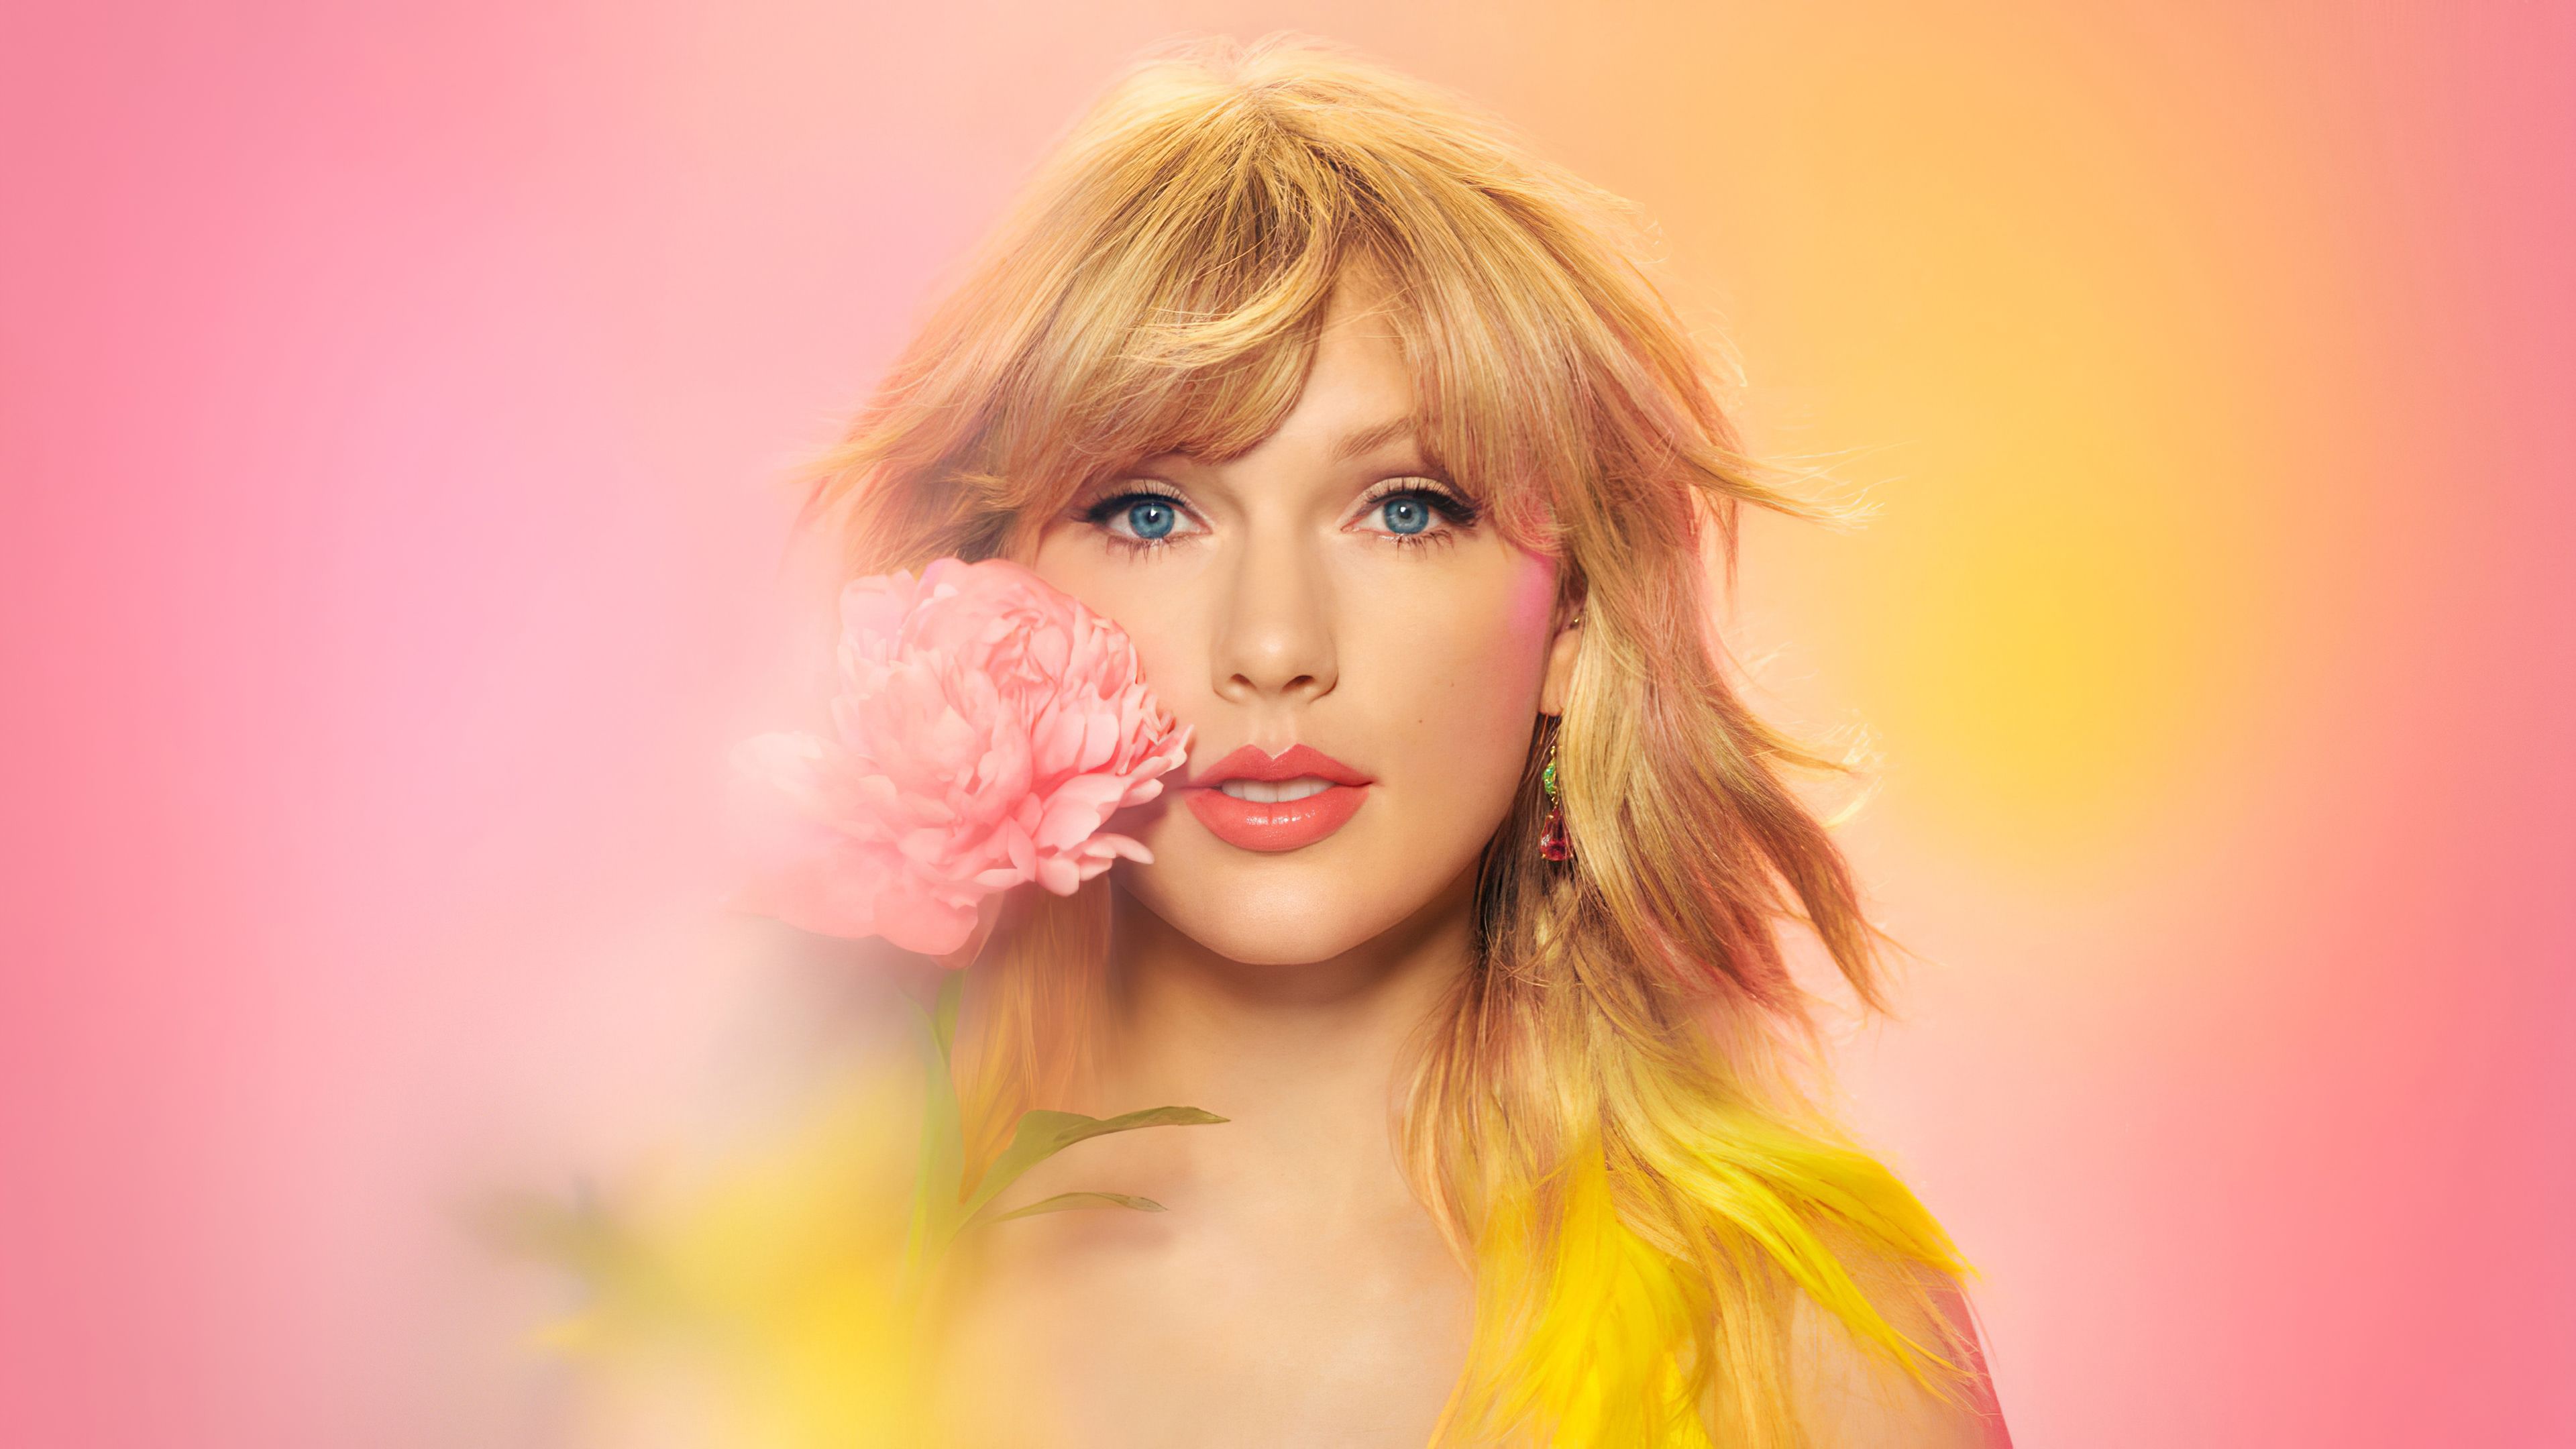 Taylor Swift Apple Music 2020 Photohoot 4k, HD Music, 4k Wallpaper, Image, Background, Photo and Picture